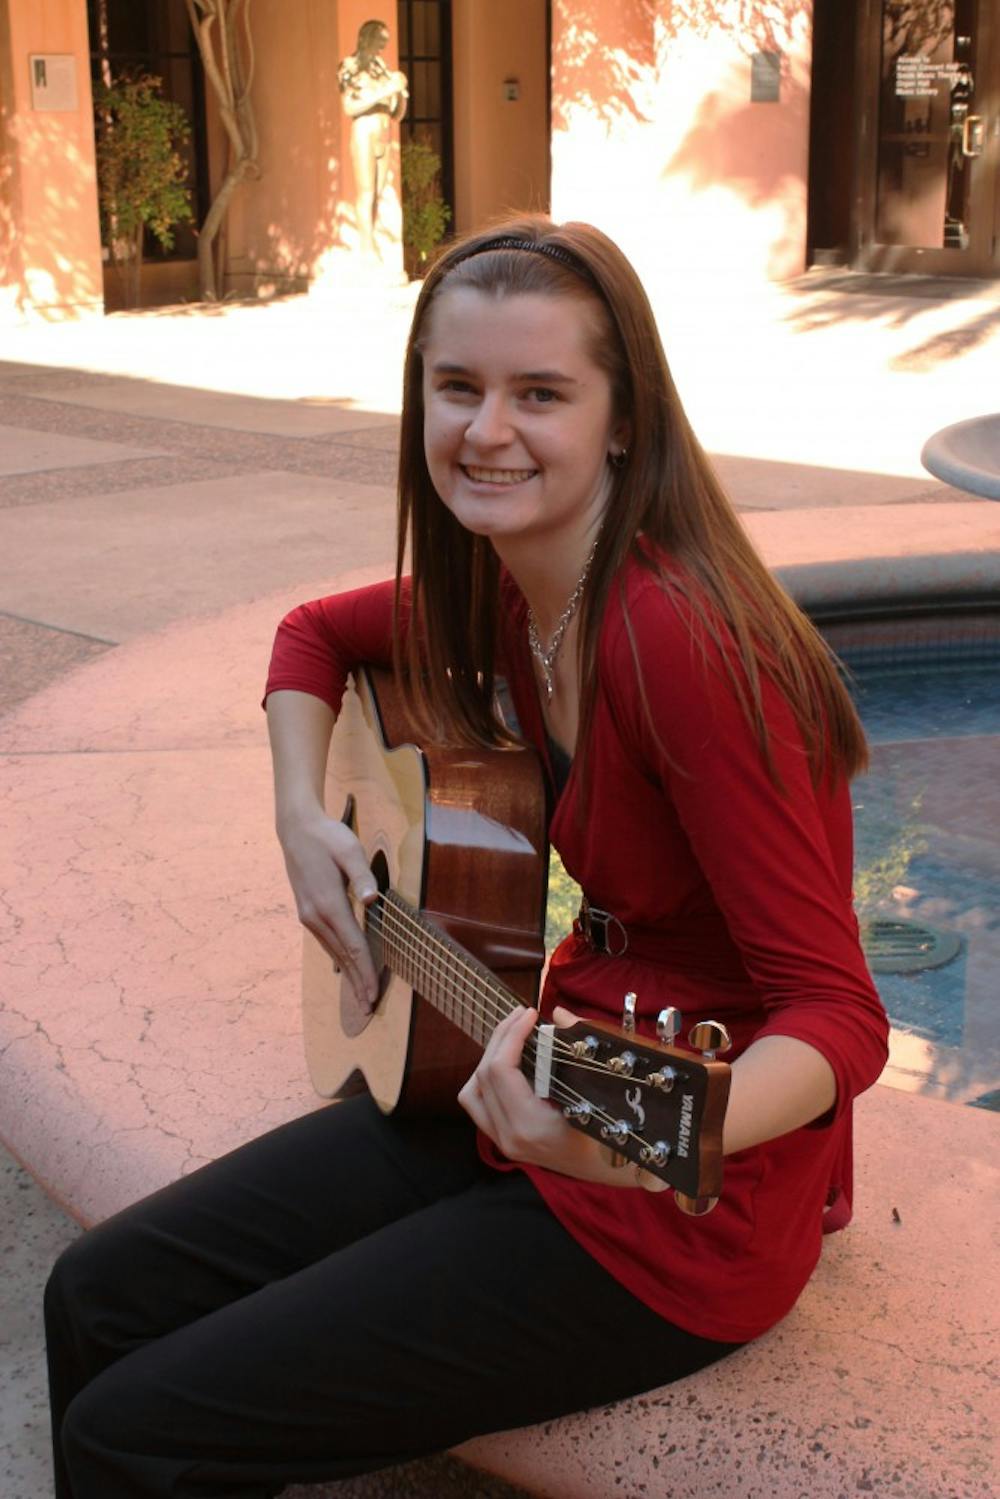 Shelbe Olson, music therapy major and sophomore, practices her guitar in the music building at ASU. Olson, along with other music therapy majors, are required to learn the basics of guitar and other musical instruments for their field of study. (Photo by Laura Davis)